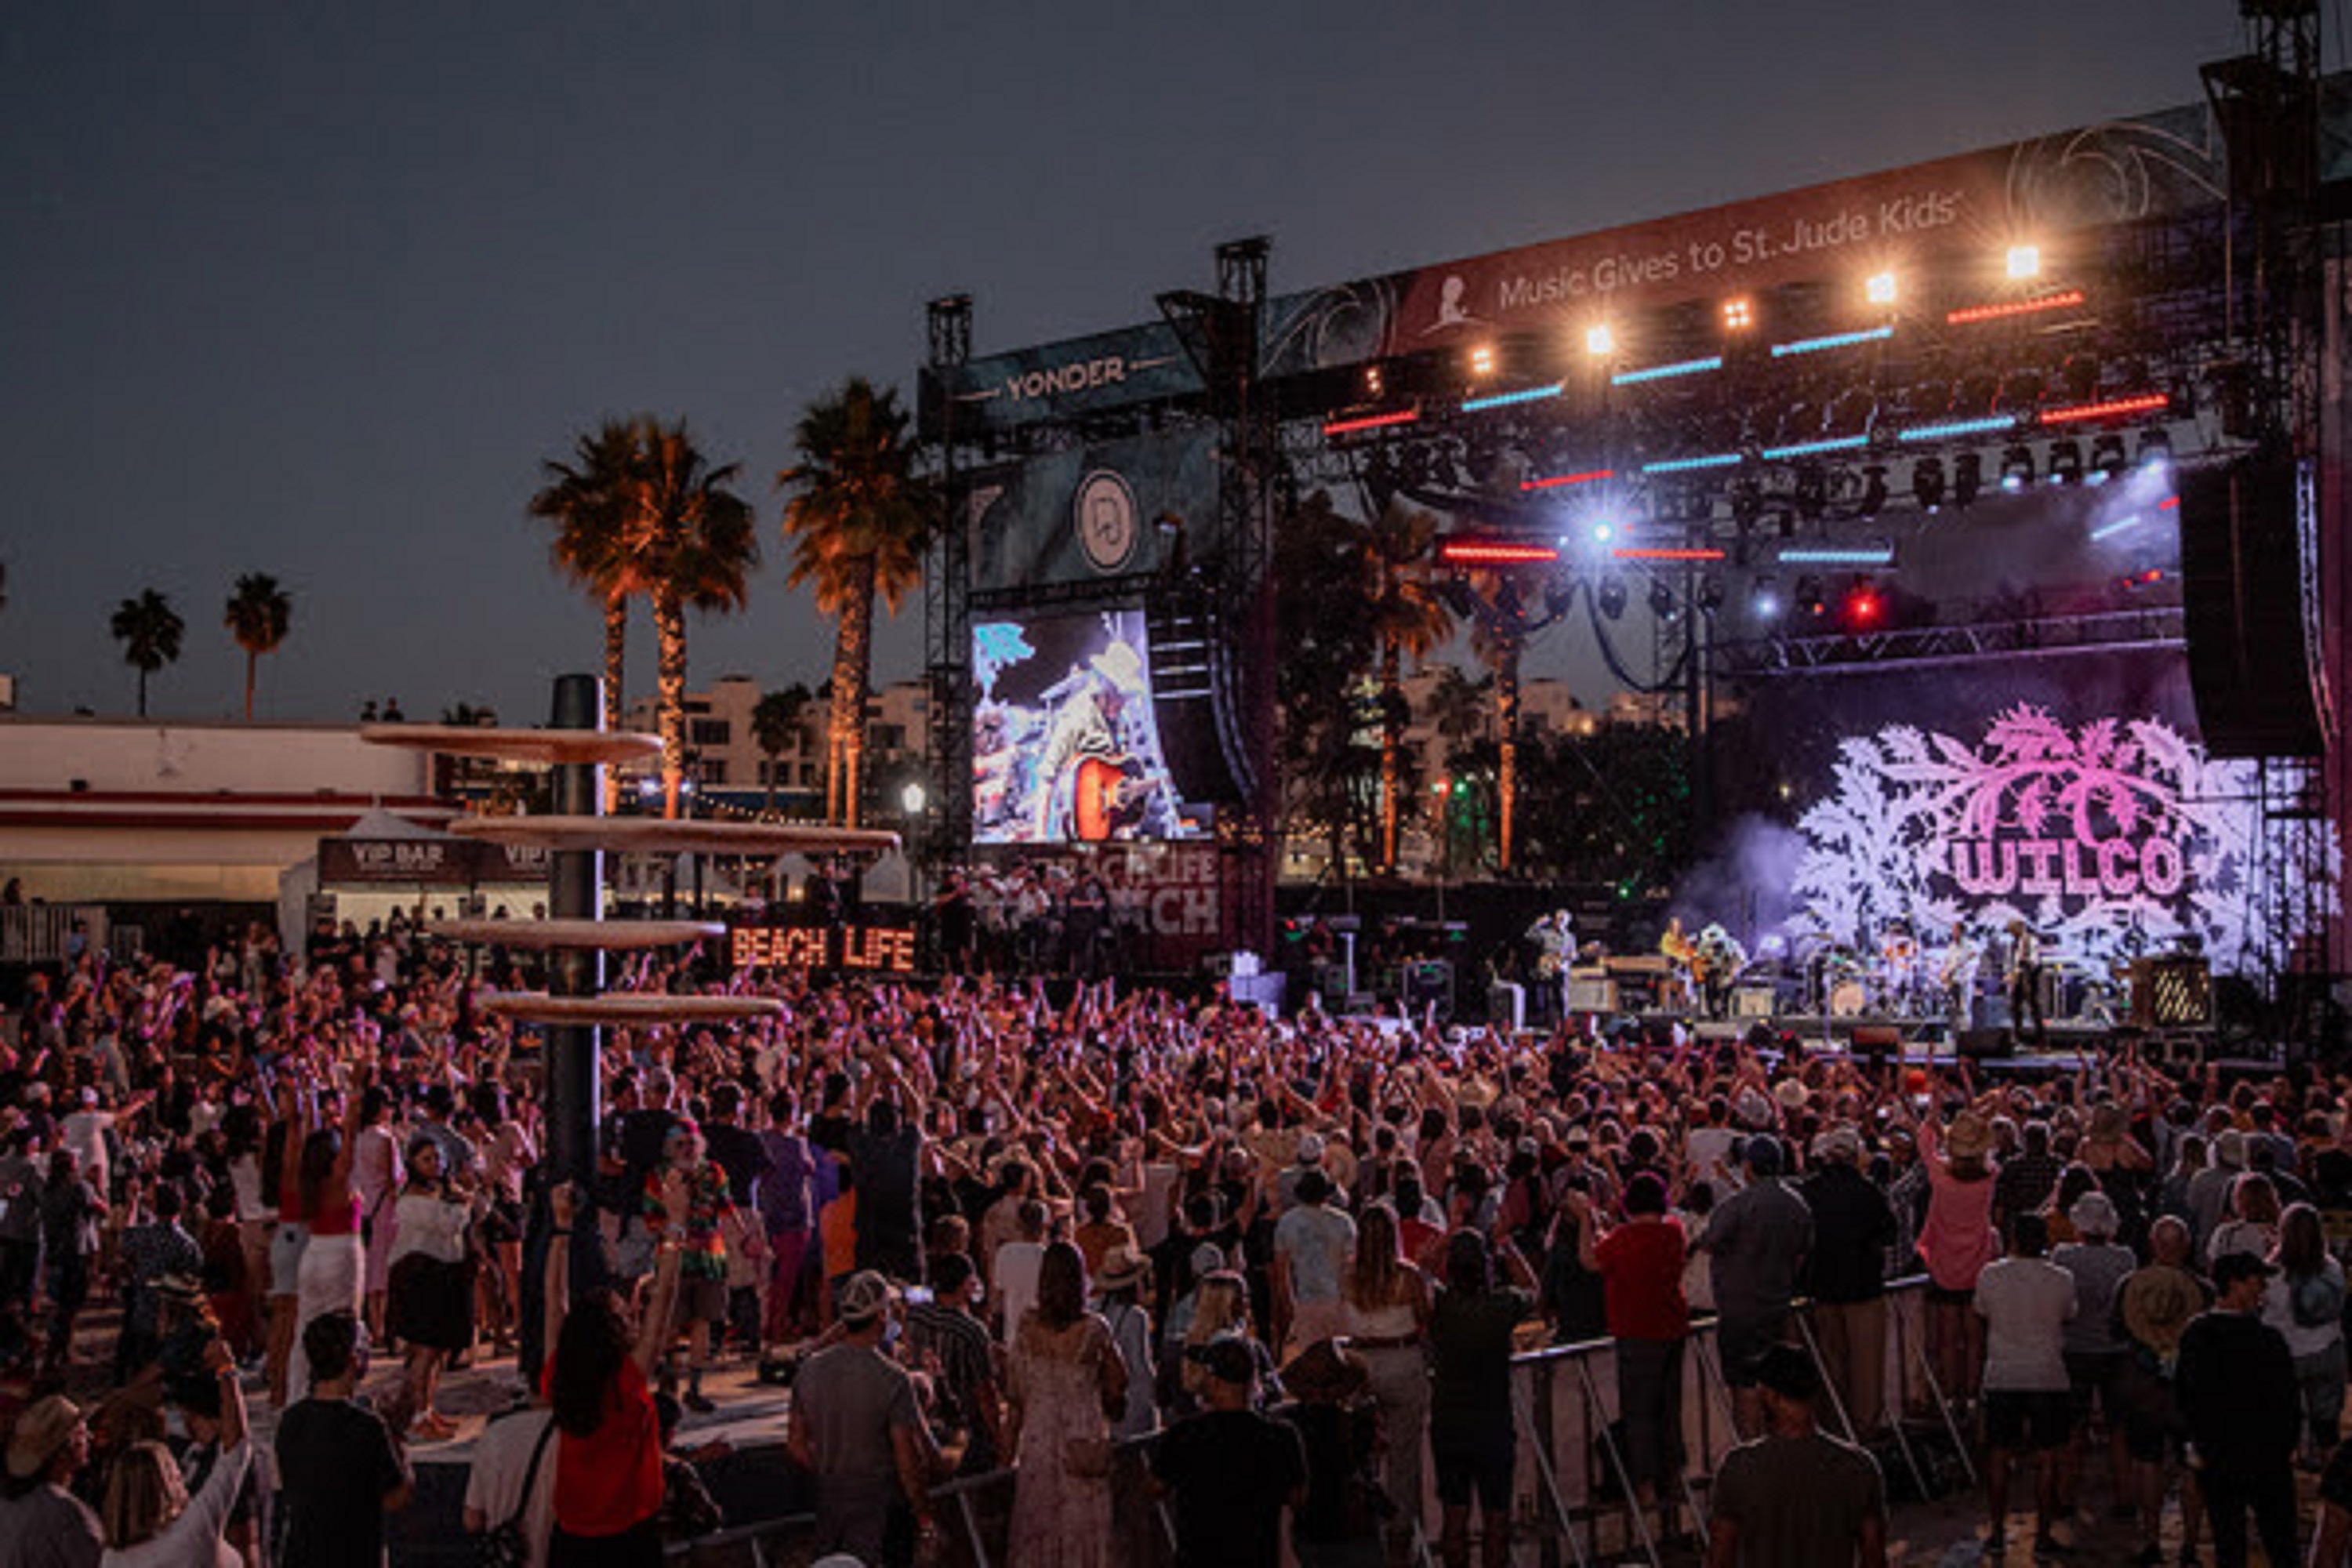 BeachLife Ranch Country & Americana Festival Brought Music Stars & Thousands Of Fans Together In Redondo Beach, CA Sept 16-18 With The Lumineers, Daryl Hall & John Oates, Brandi Carlile And Special Songs Of Waylon Jennings Set